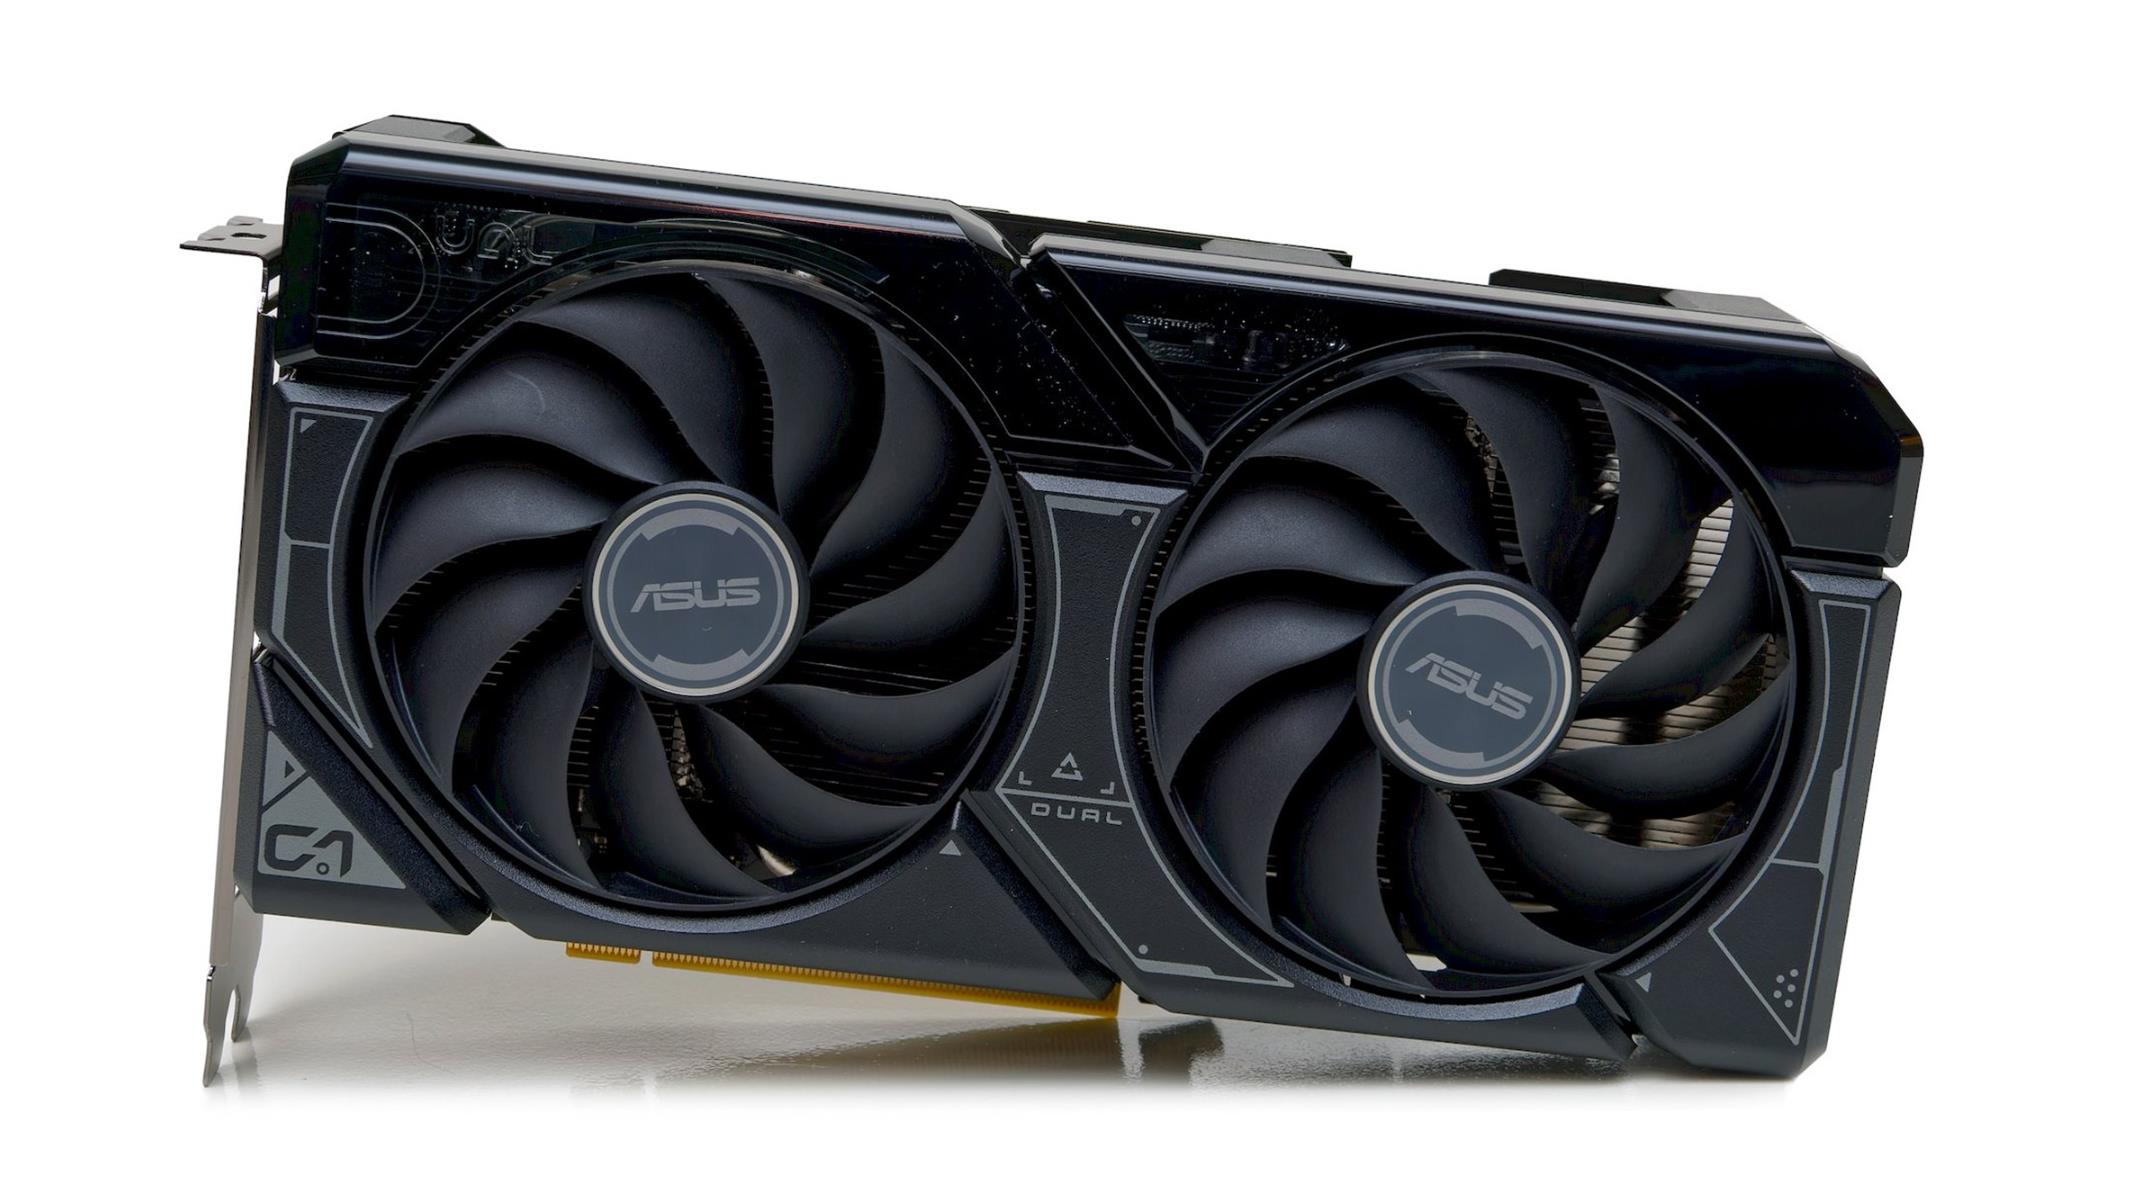 Nvidia GeForce RTX 4060 Review: Truly Mainstream at $299